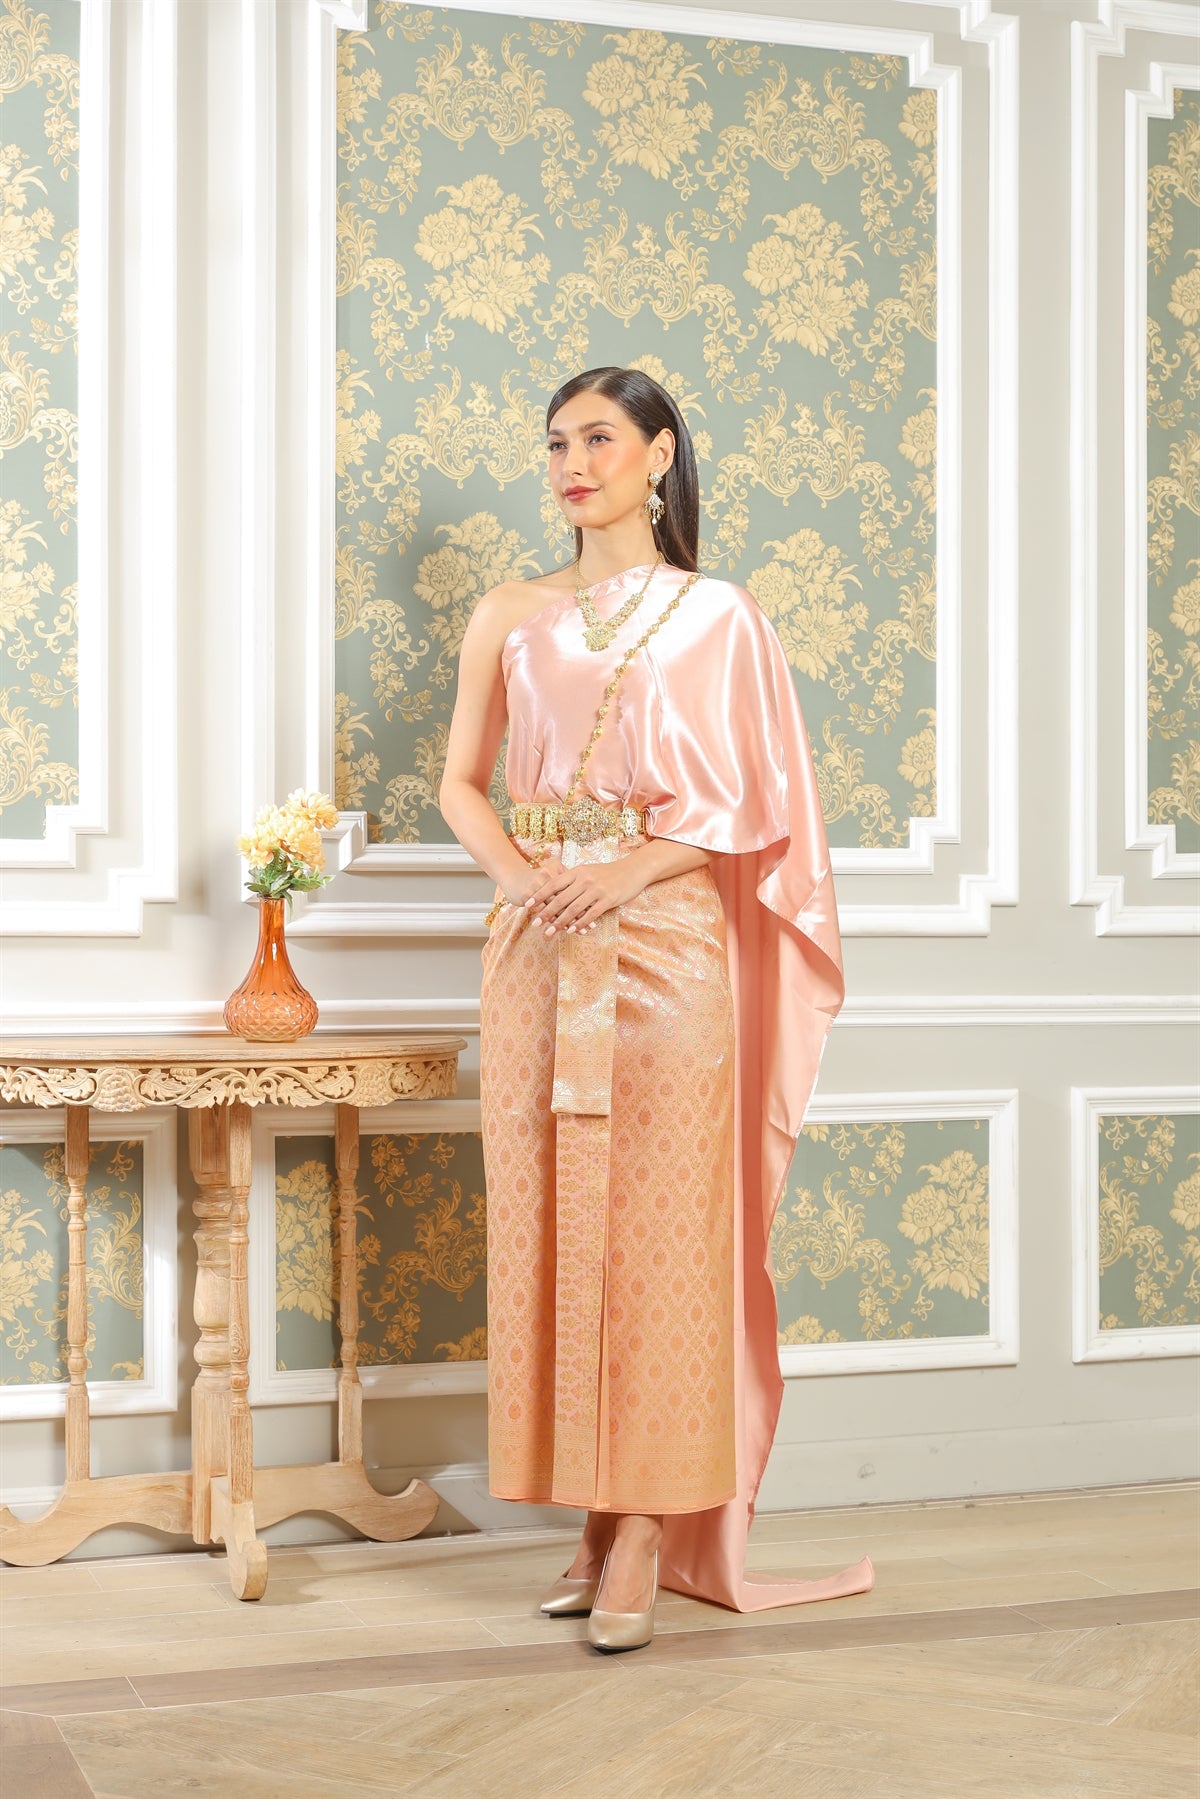 We sell beautiful traditional Thai outfits for women online.